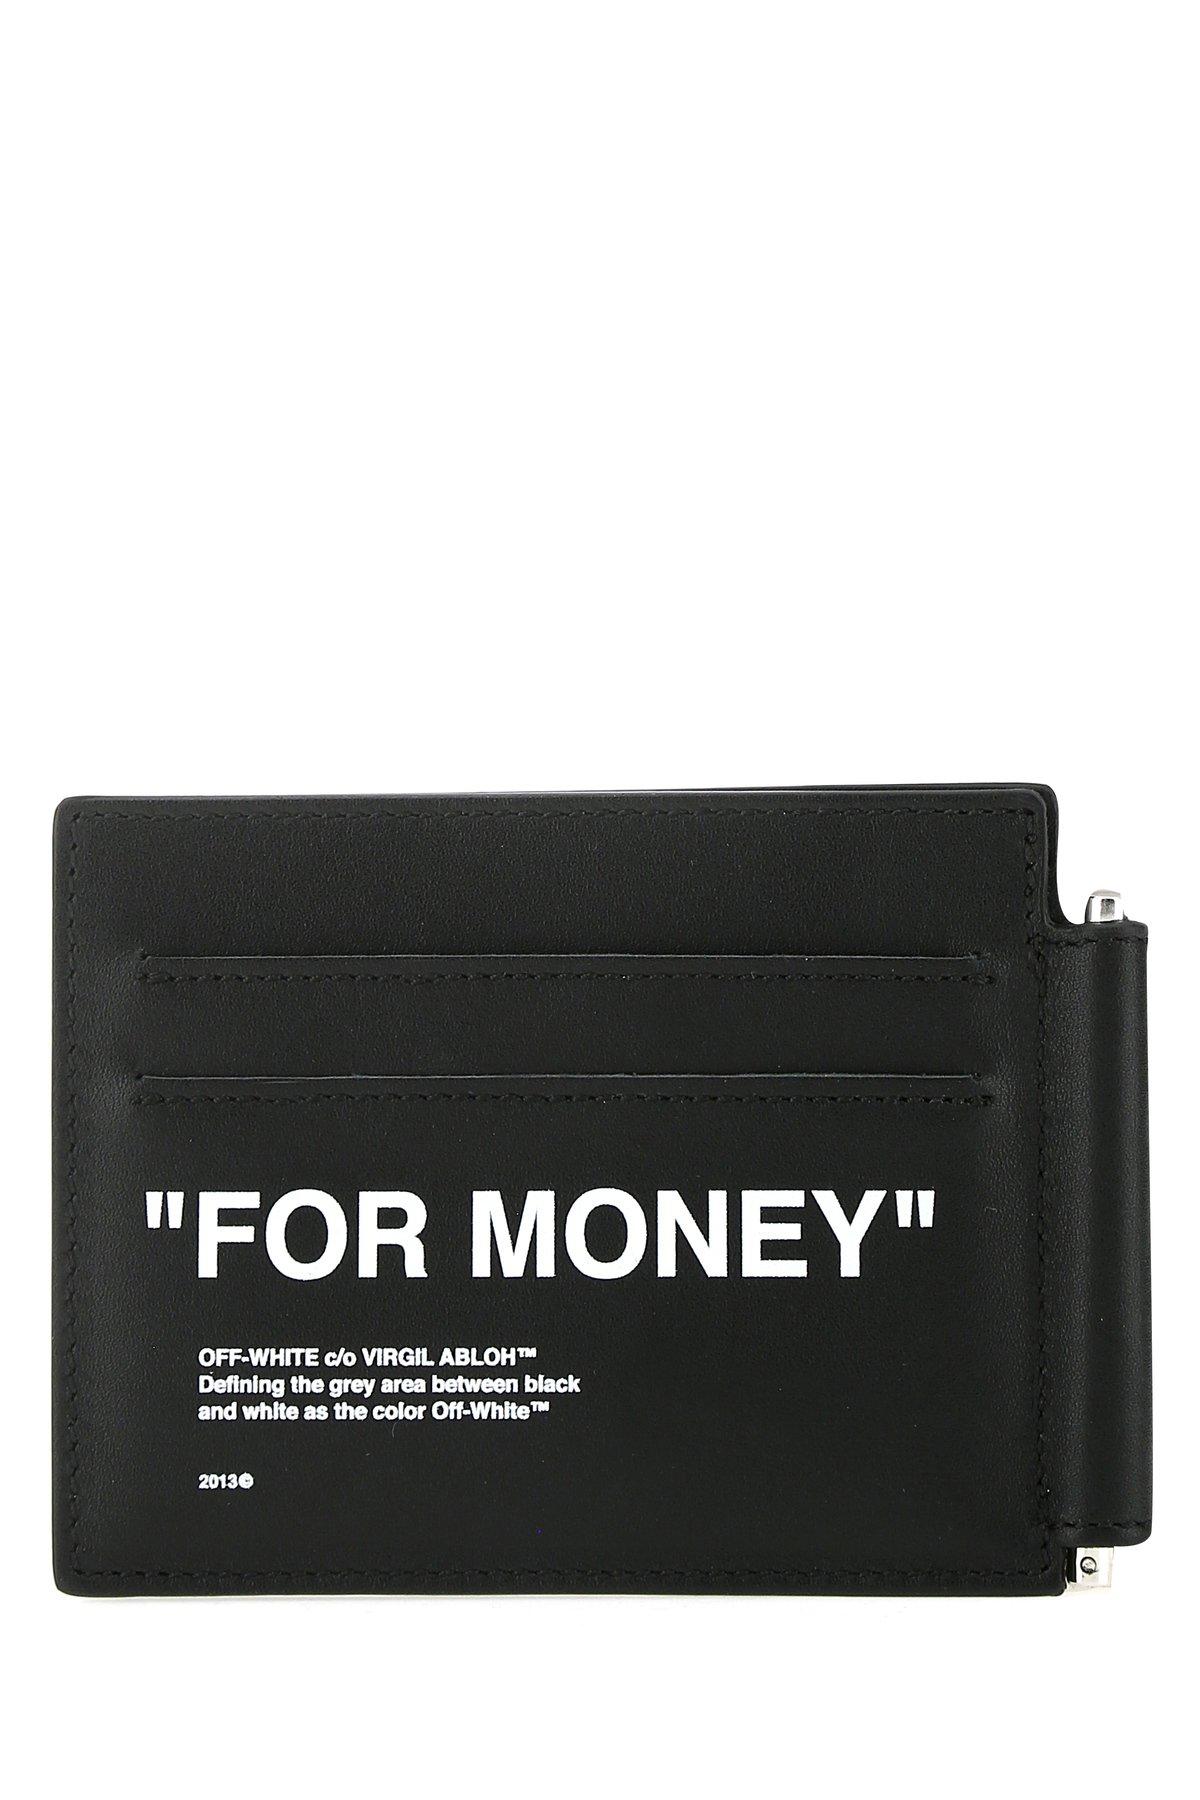 Off-White c/o Virgil Abloh Leather Quote Bifold Wallet in Black 